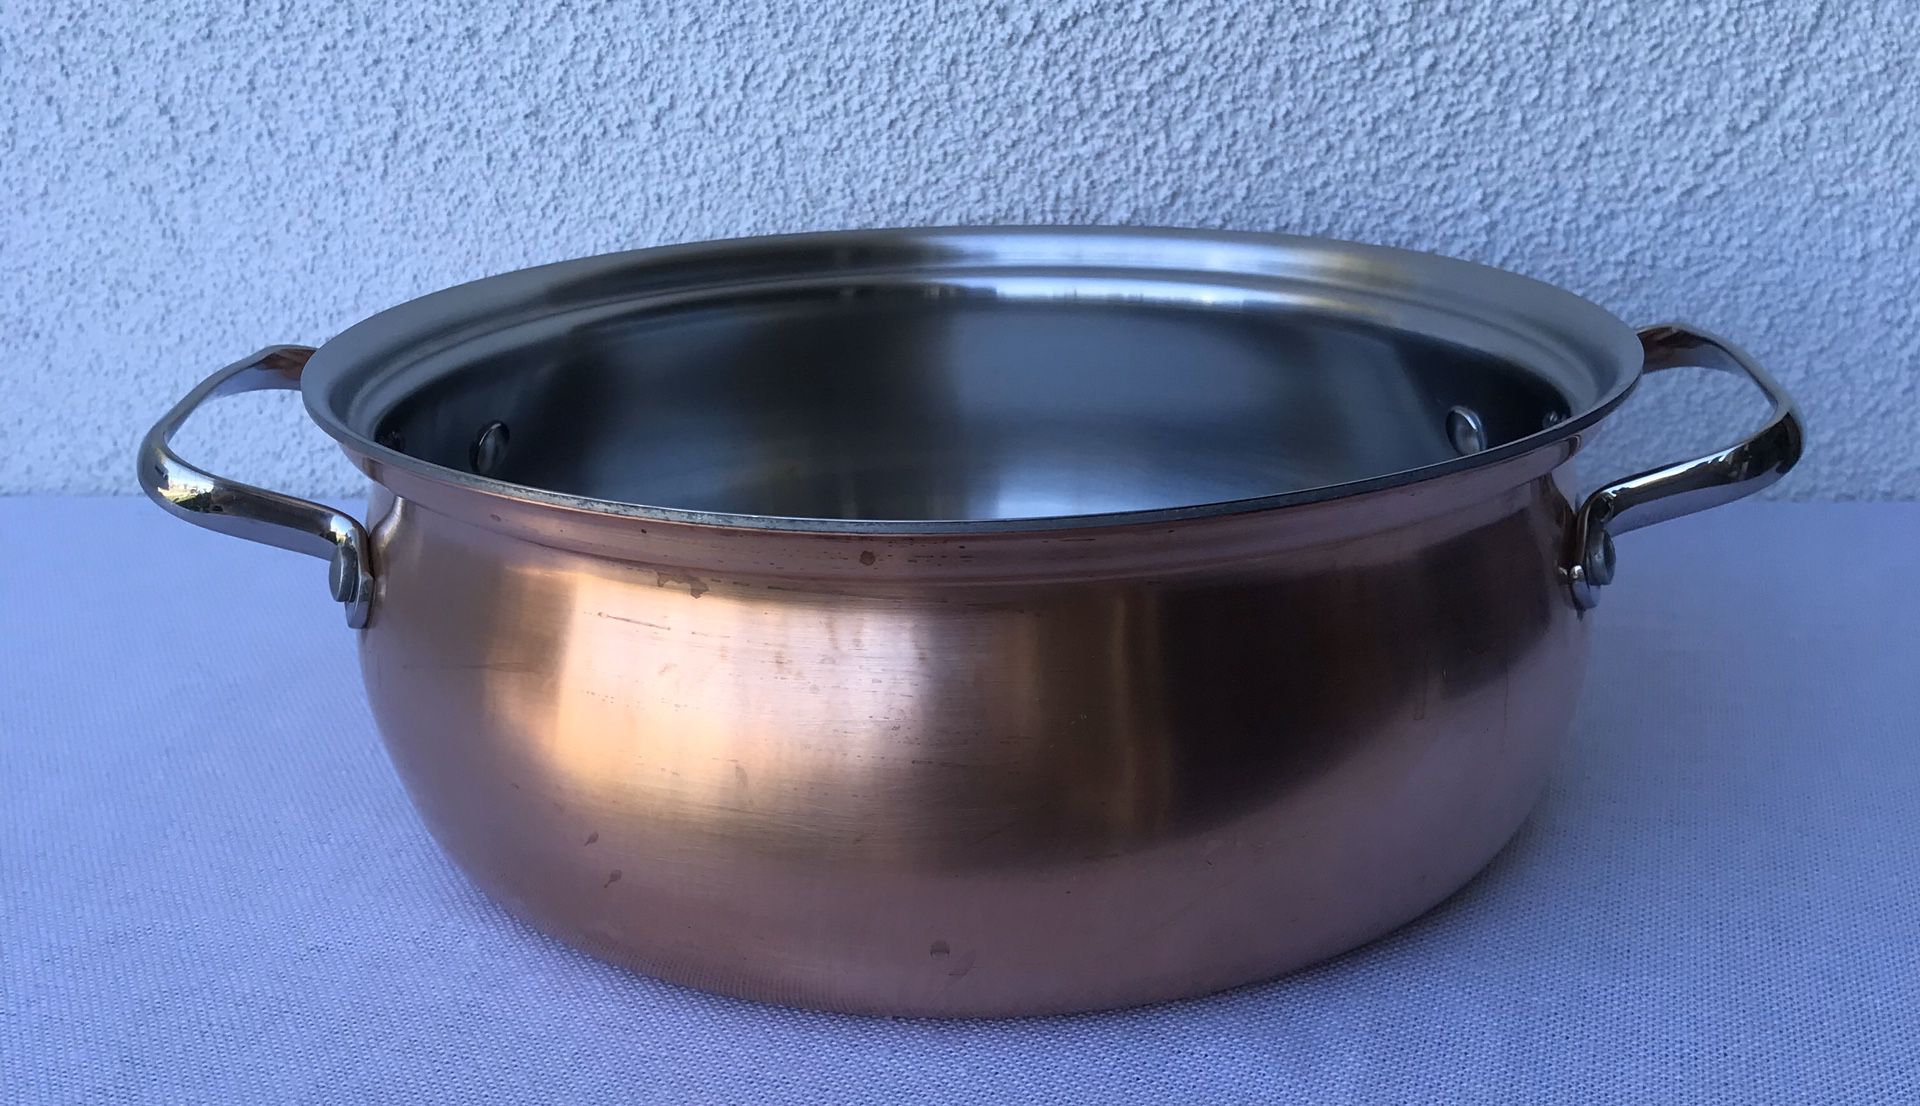 Copper Pot - Price is Firm